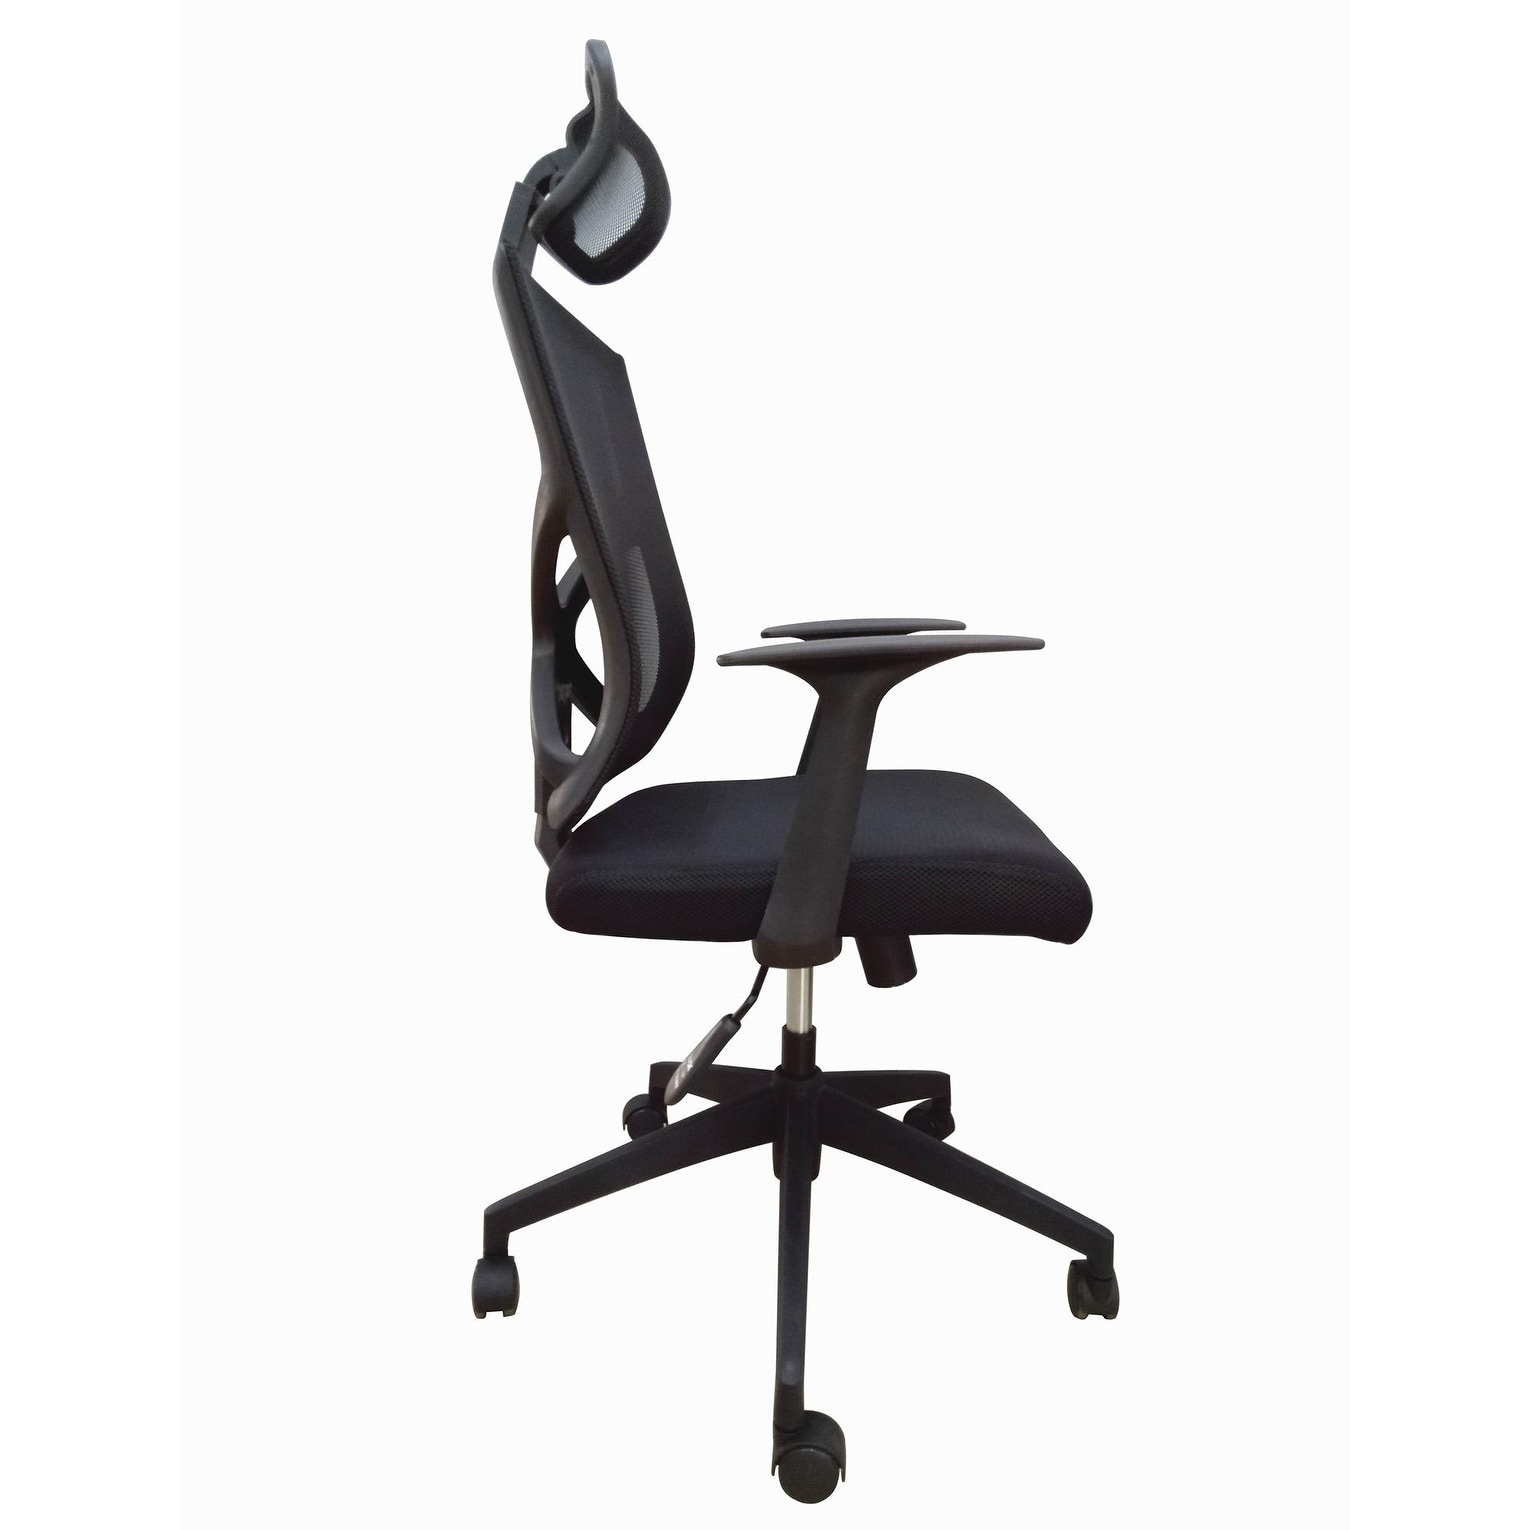 https://ak1.ostkcdn.com/images/products/is/images/direct/61cd68b9039076cac5e59ef36ad5cb04e3670ce5/2xhome-High-Back-With-Headrest-Chair-Office-Mesh-Chair-Tilt-Arms-Lumber-Support-Large-Base-Adjustable-Swivel-Task-Executive.jpg